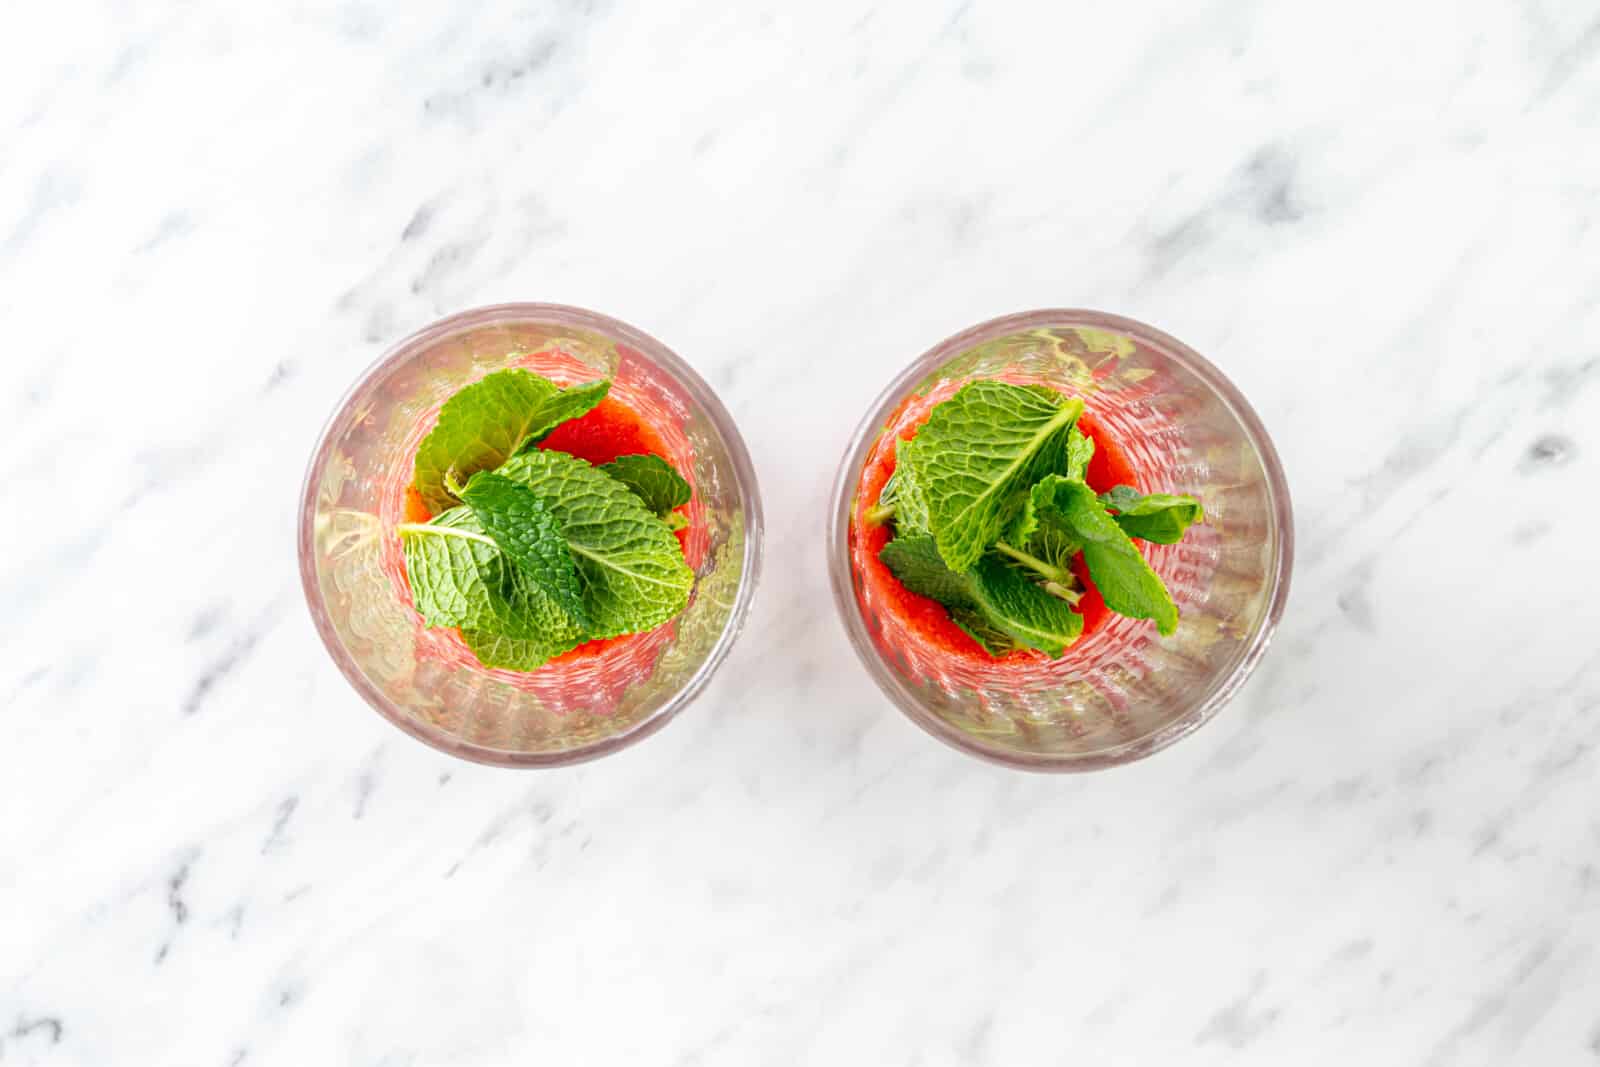 blended fresh strawberries in two glass cups and fresh mint leaves.
